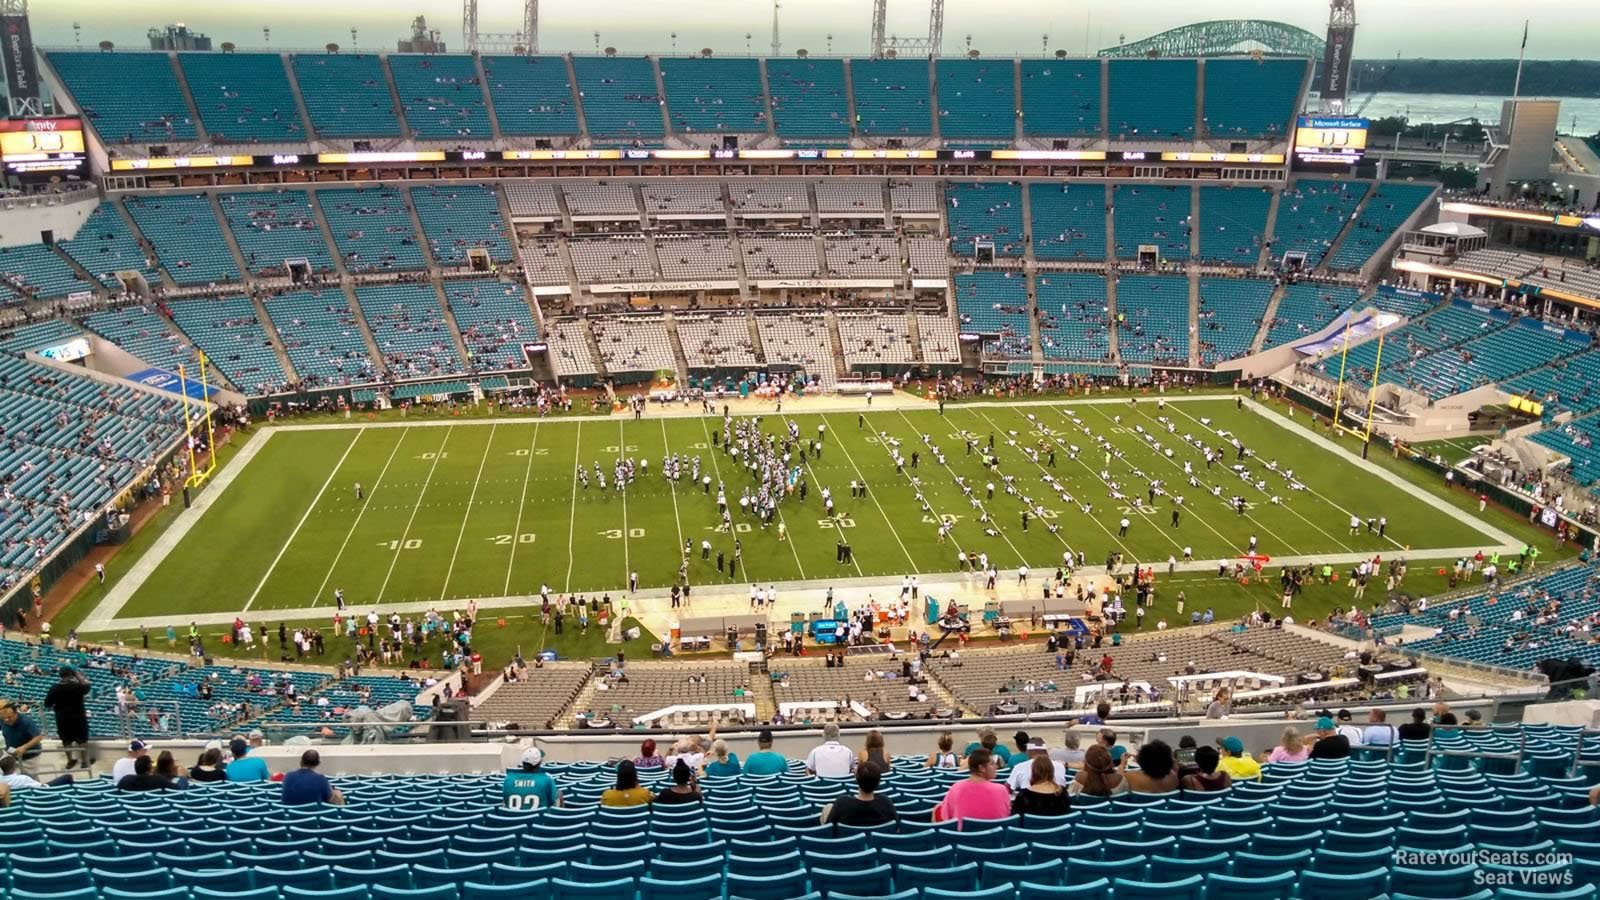 section 411, row bb seat view  - tiaa bank field